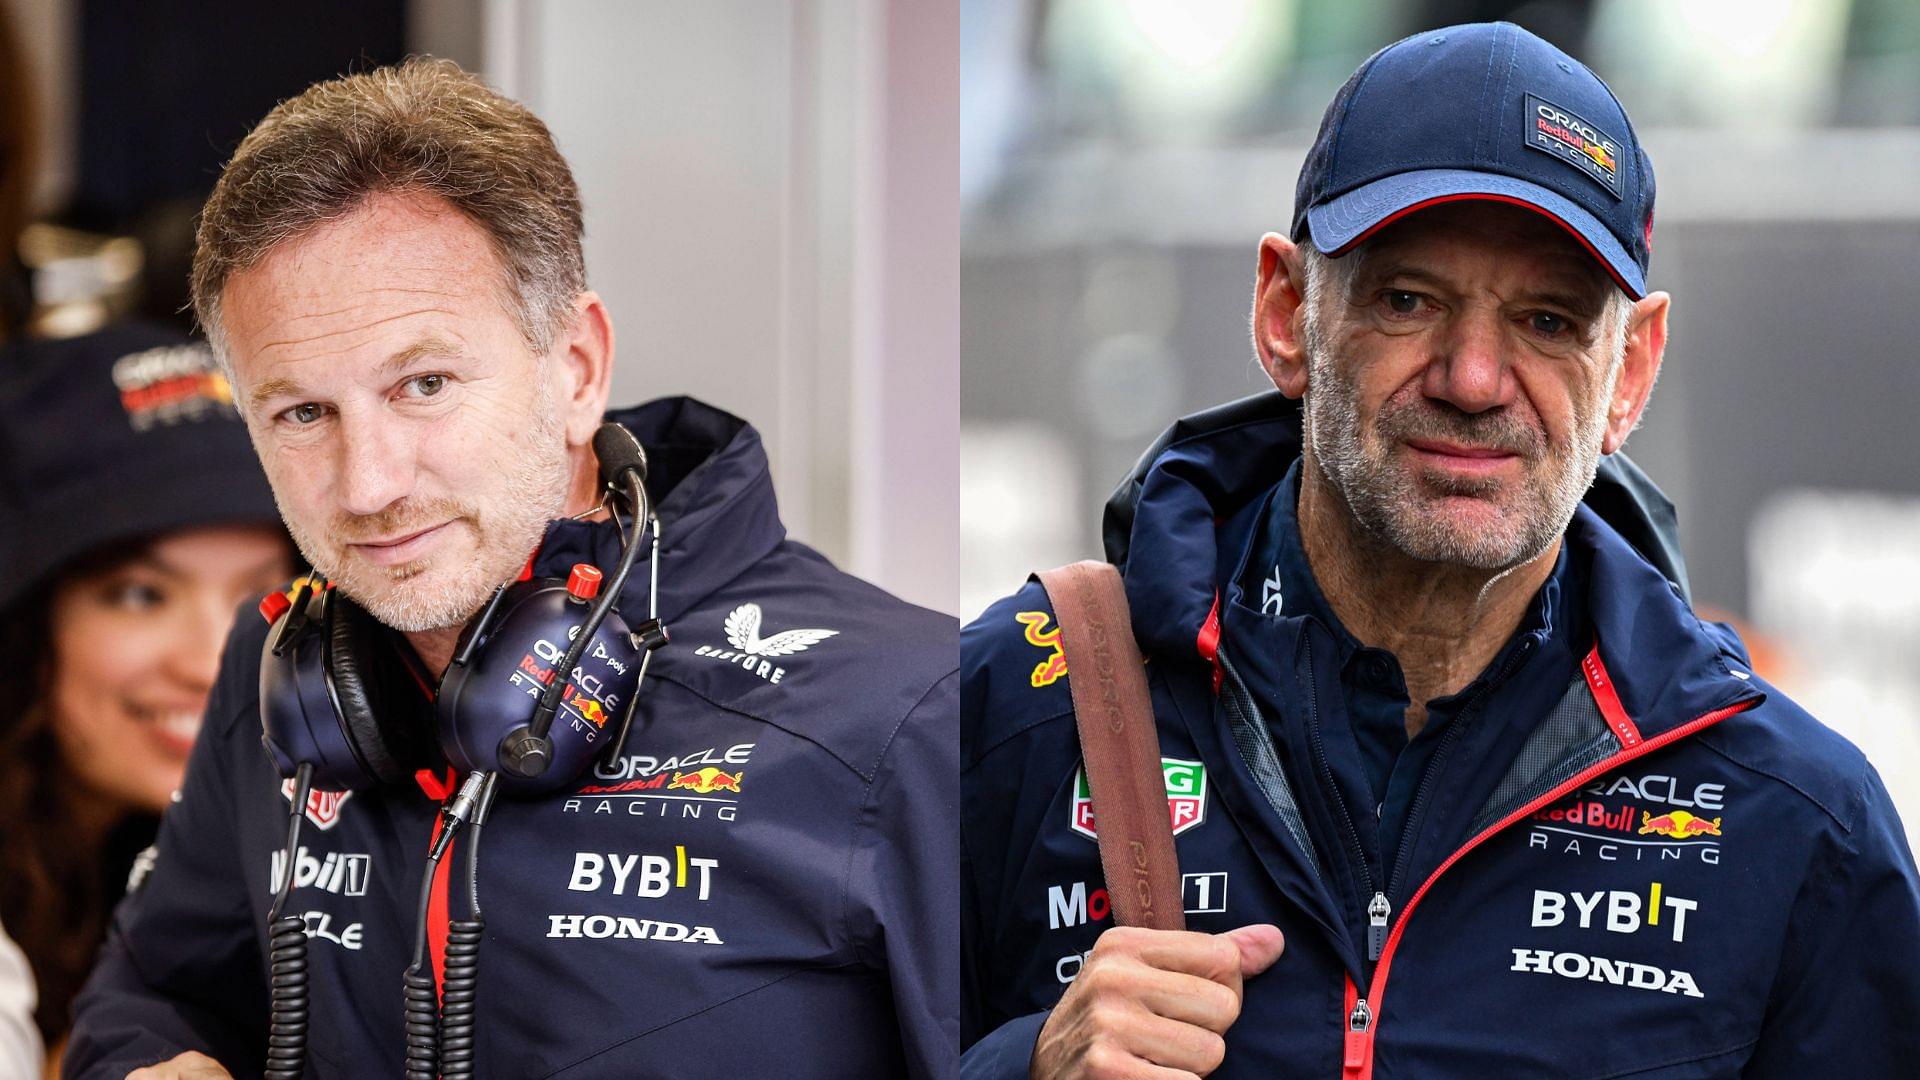 Adrian Newey Makes Decision on Future With Red Bull; Report Claims Fallout With Christian Horner